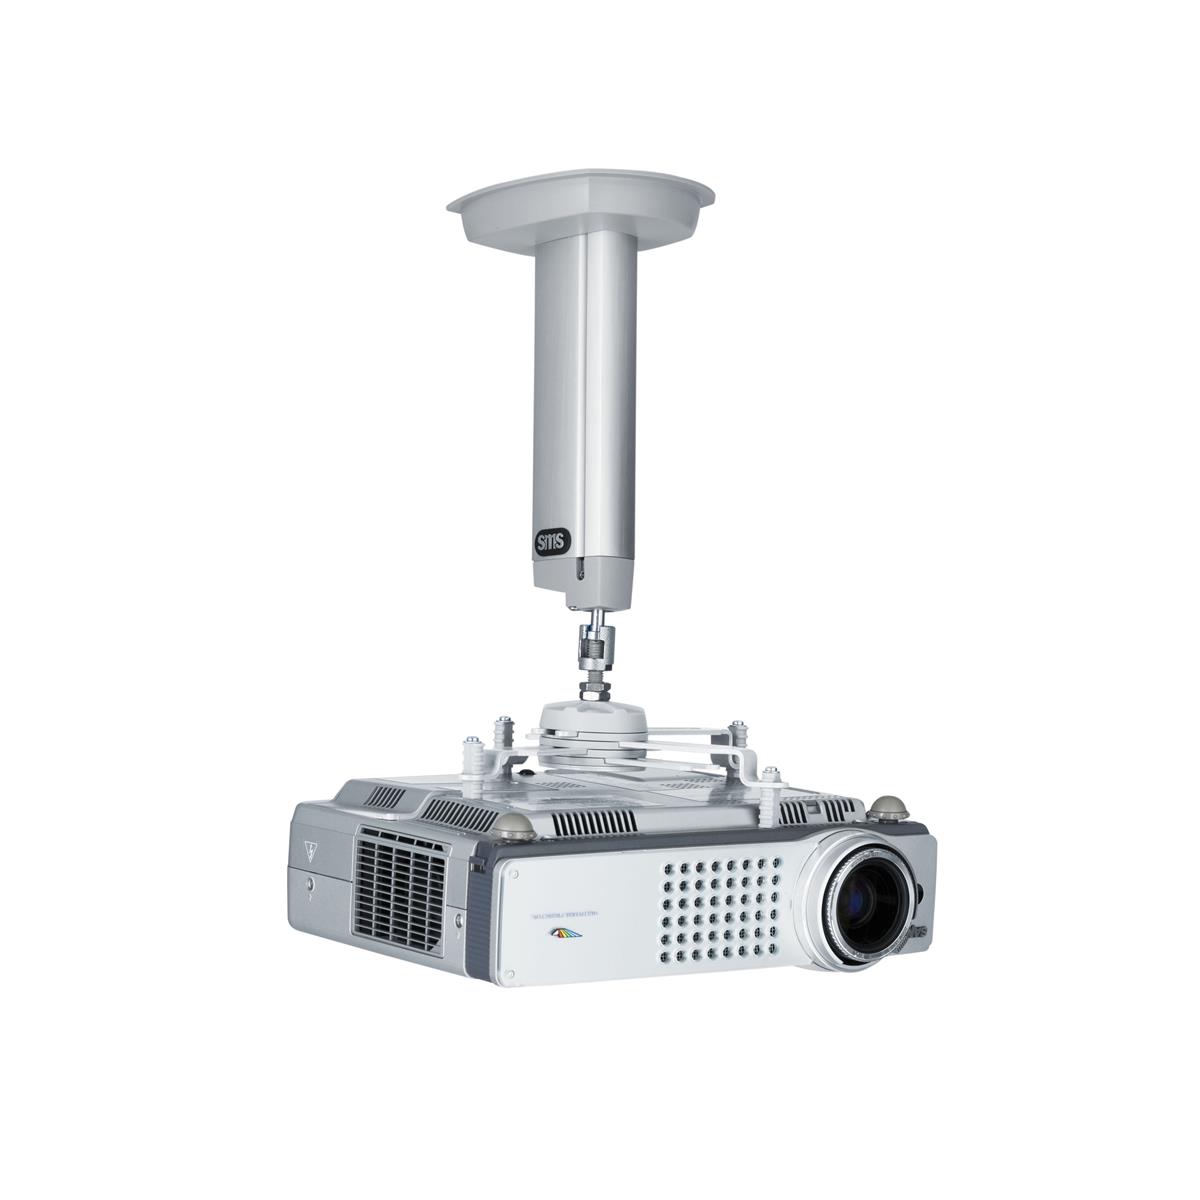 SMS Projector CL F250 incl Unislide, Aluminium/Silver, | Fixed 250mm | Ceiling | Max 12kg | Hopea